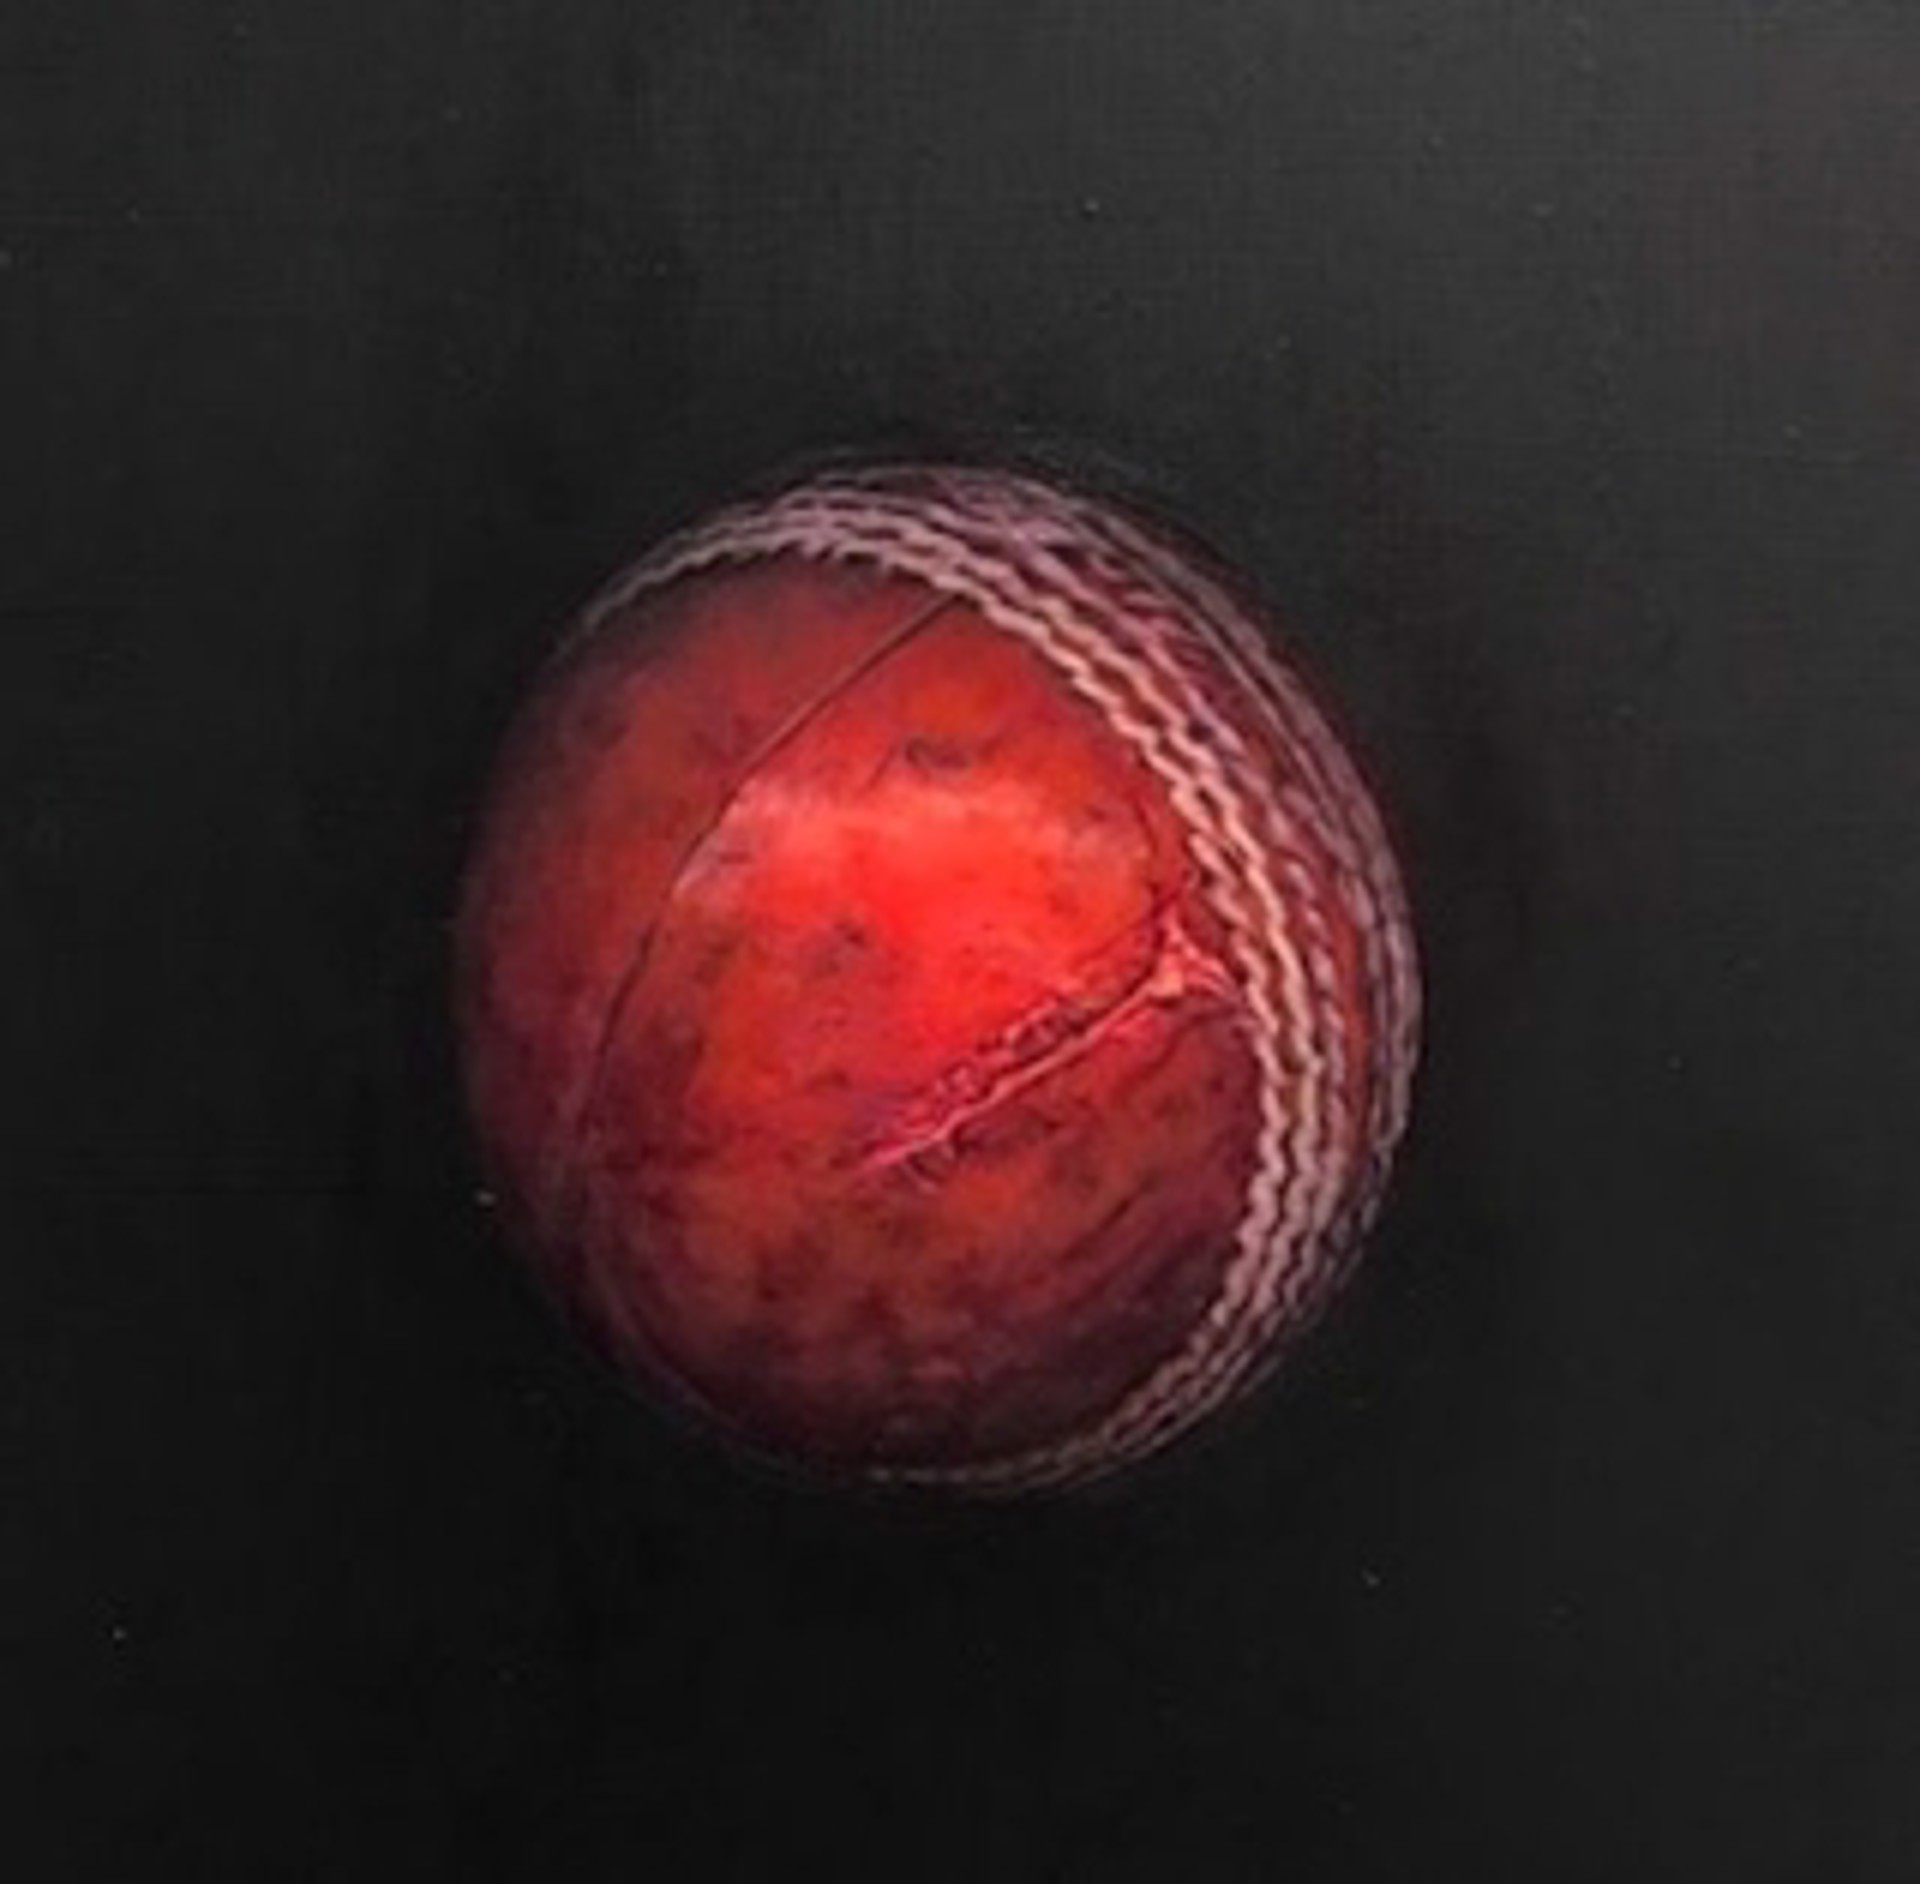 Cricket Ball 1 by Tilly Woodward